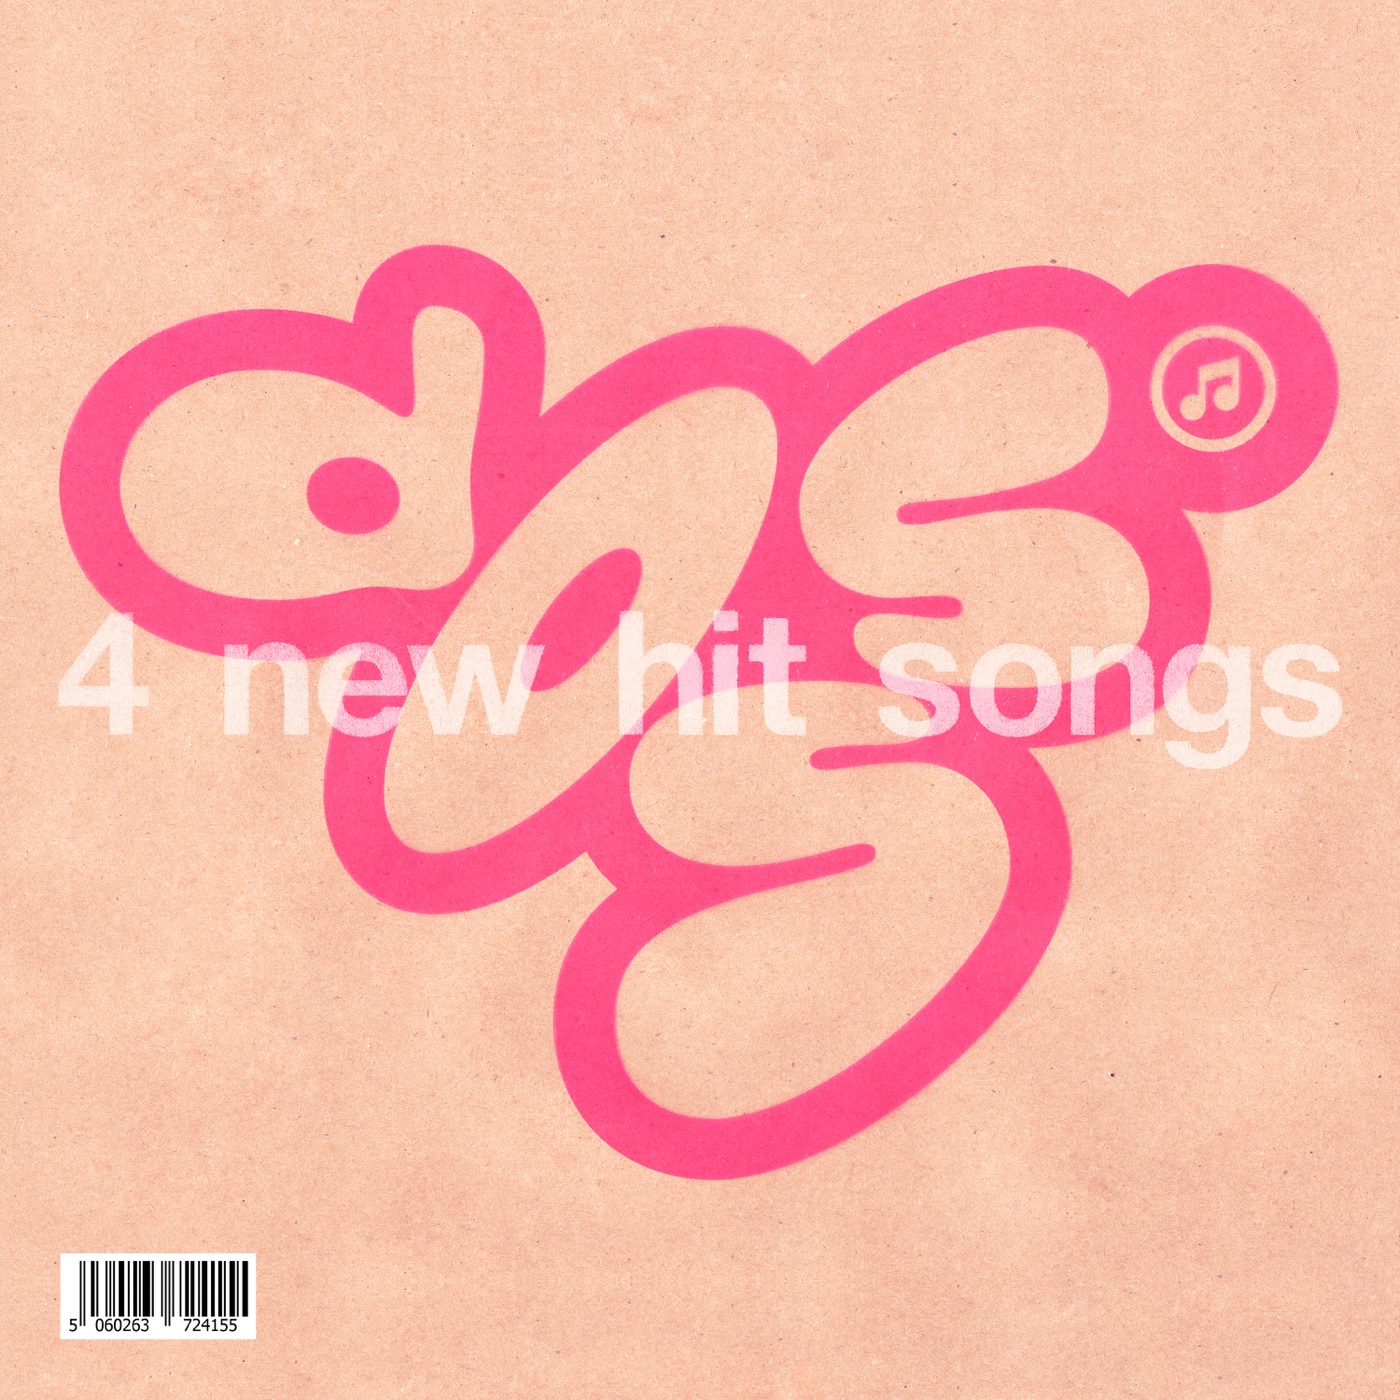 4 New Hit Songs by Doss